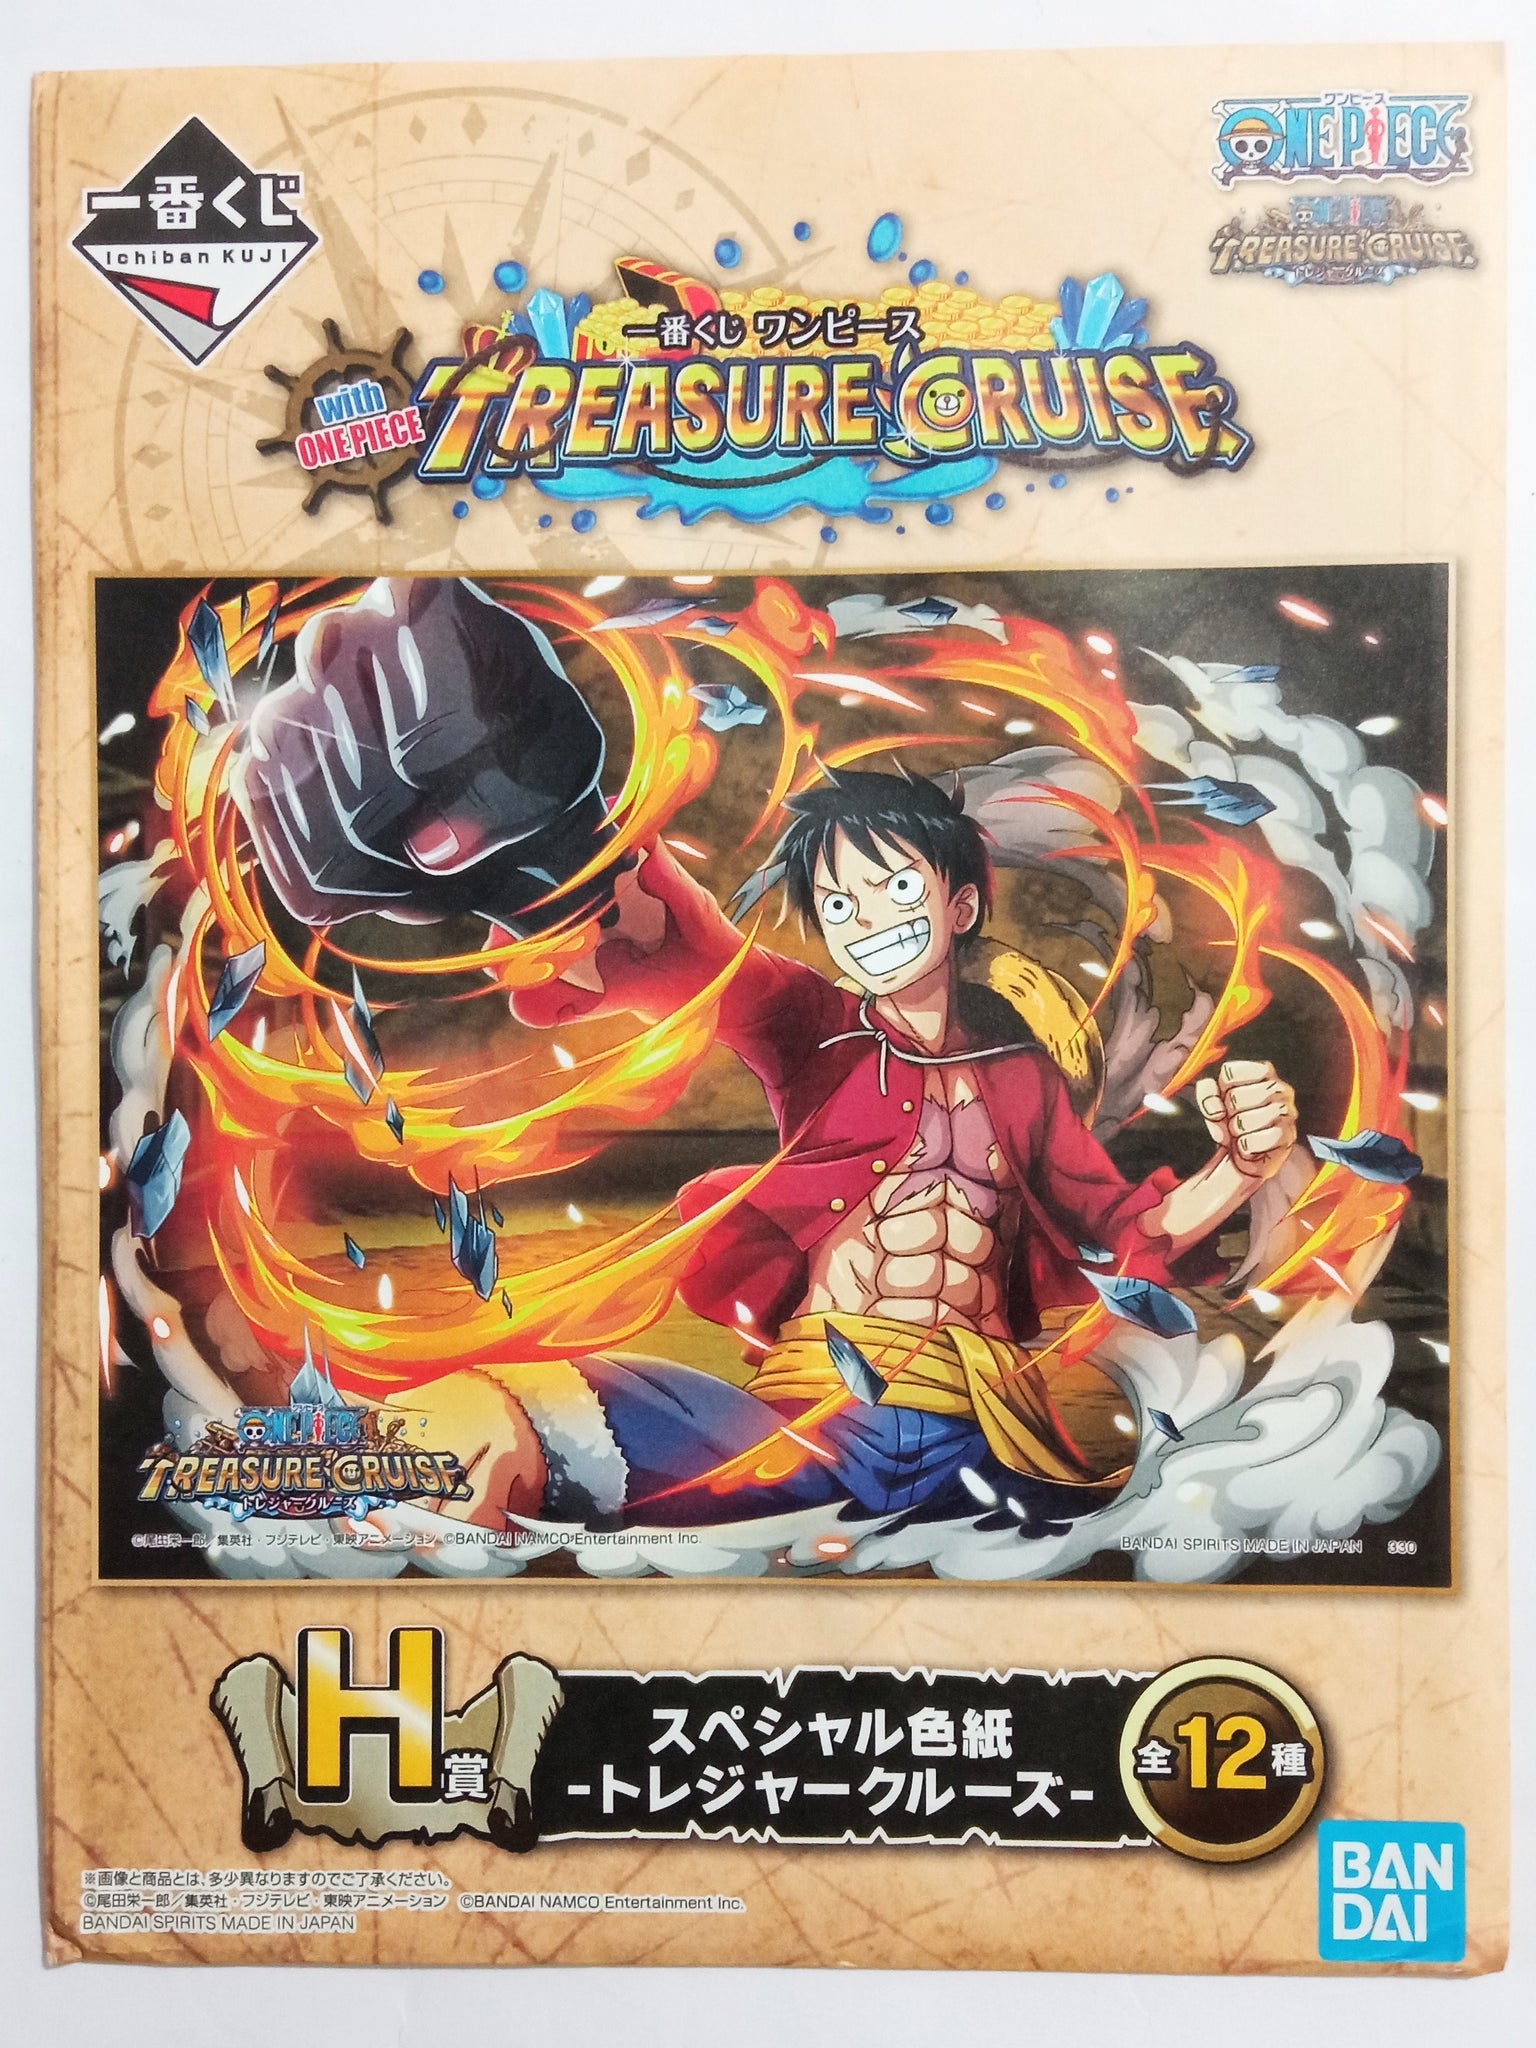 Nintendo 3ds One Piece Unlimited Cruise SP Bandai for sale online